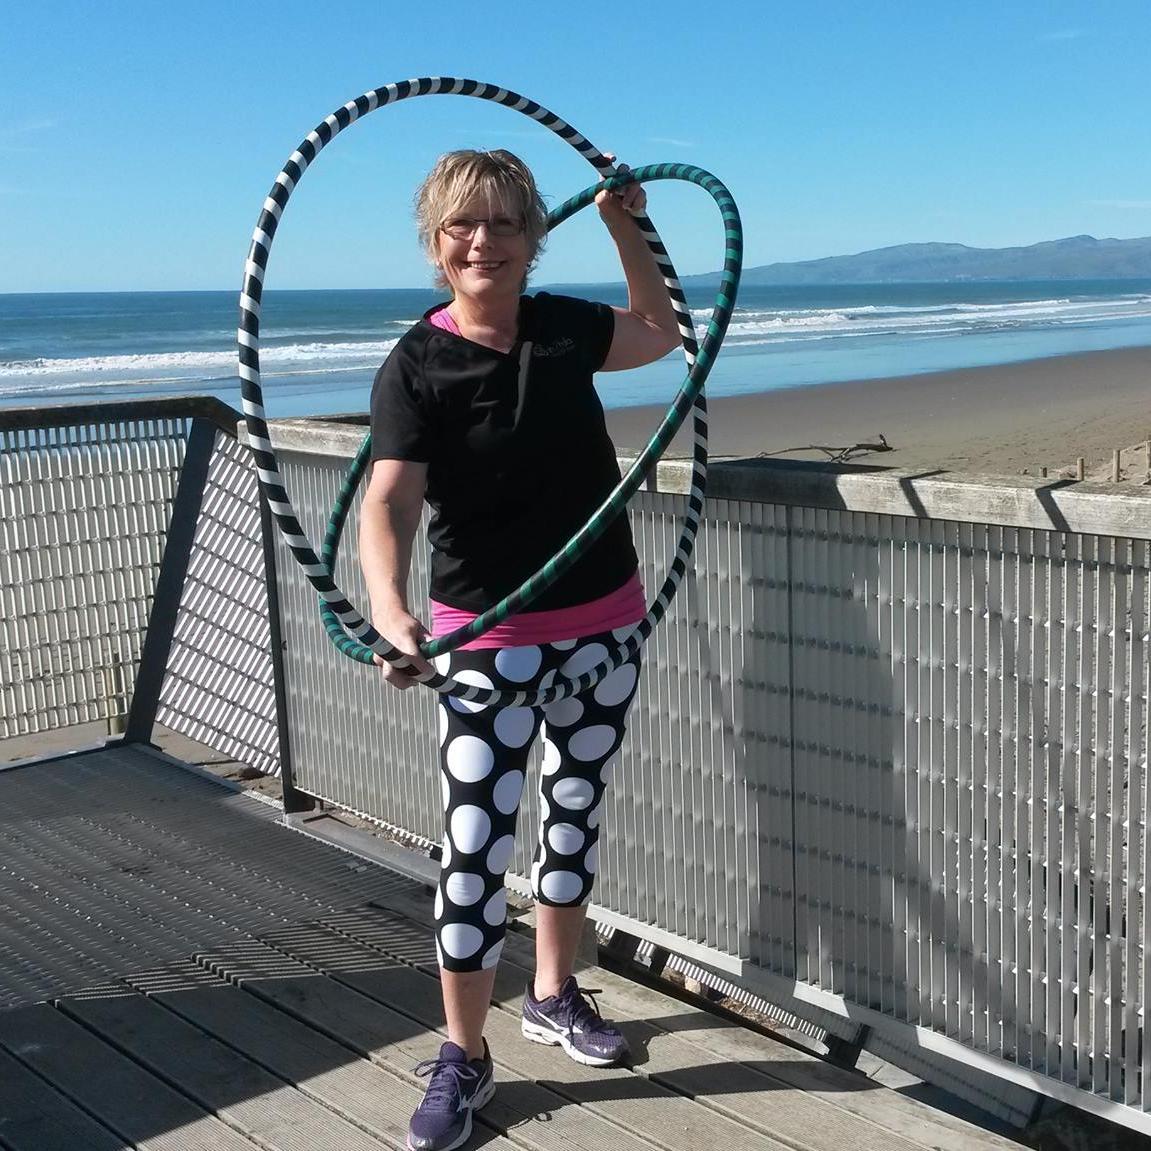 Our mission and passion is to help people to become fitter and healthier.
We manufacture, sell, and teach Fitness hula hoops.
We work with all ages